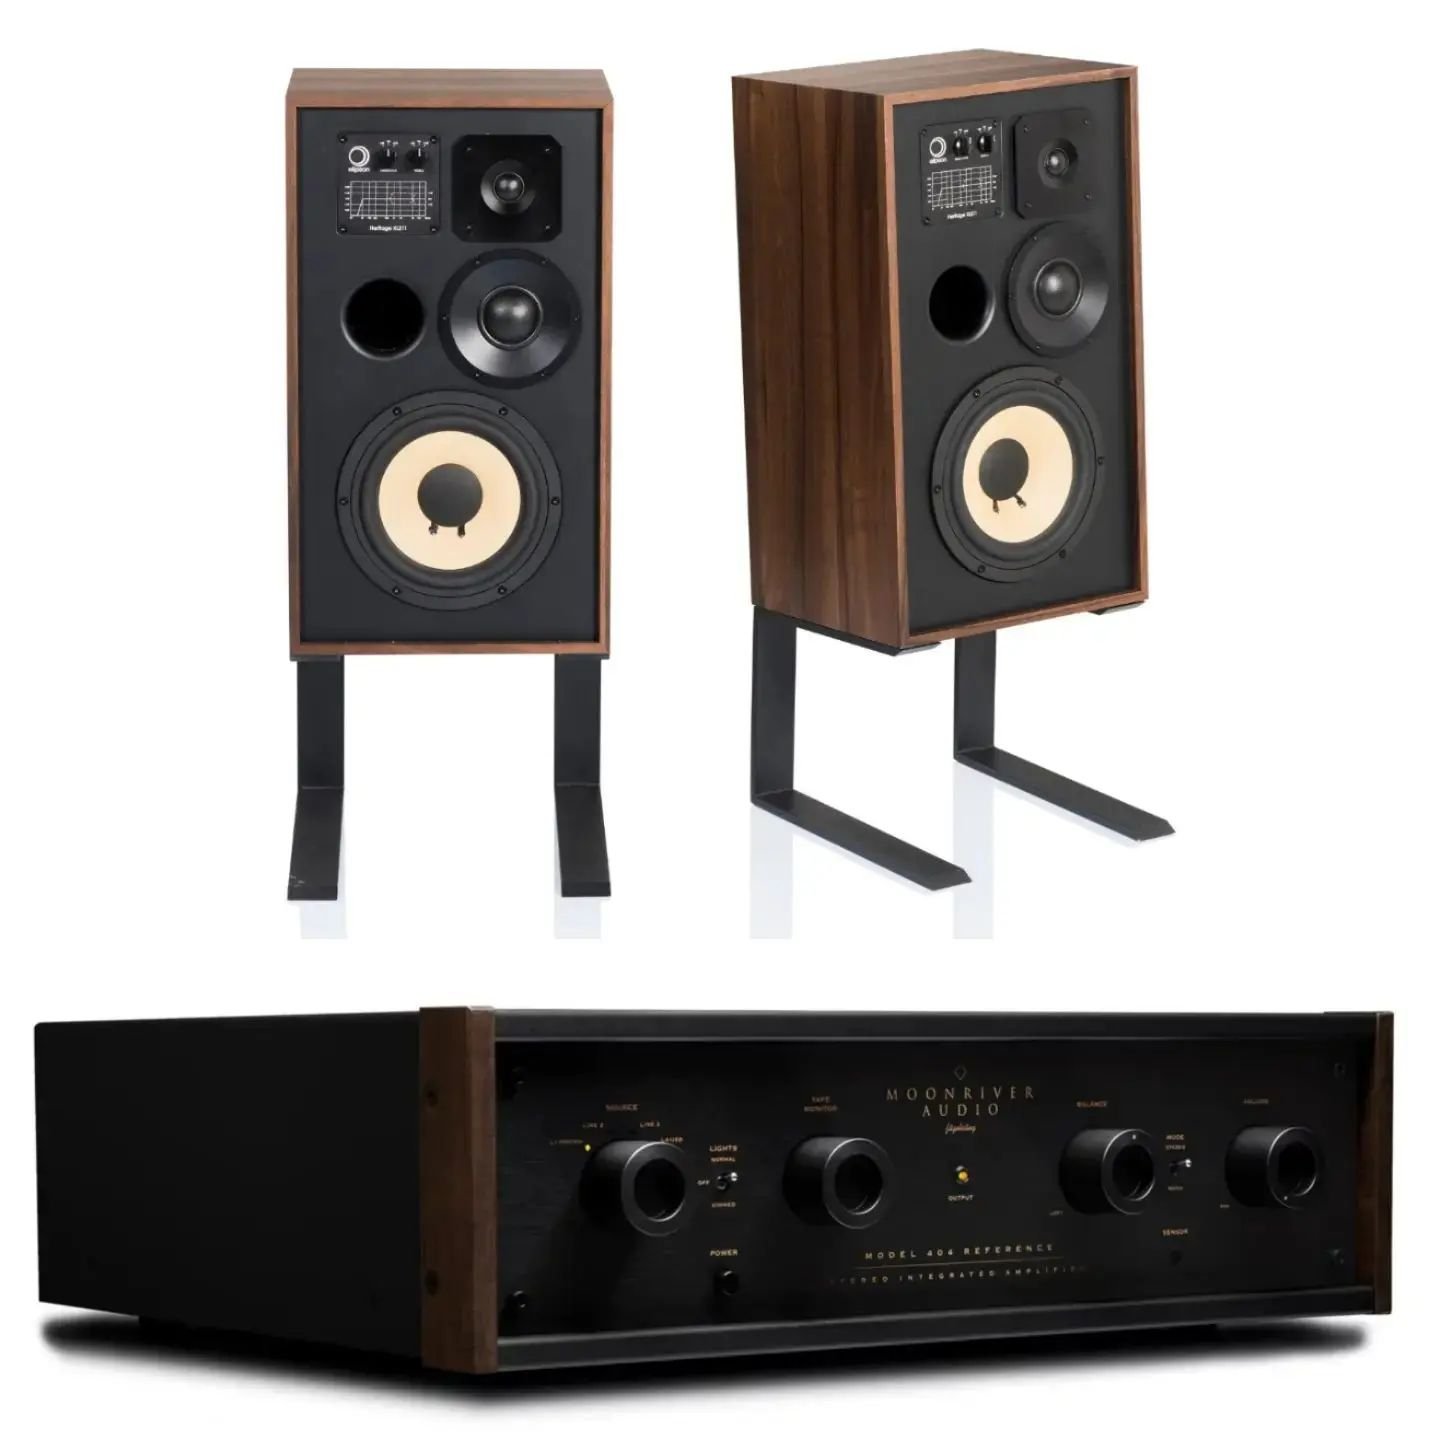 Mid-Century aesthetics, classic sound.

Buy your @elipson XLS11 and @moonriveraudio 404 integrated amplifier from www.valhifi.co.uk.

#elipson #xls11 #frenchdesign #frenchflair #vintagespeakers #vintageinspired #vintagestyle #retrohifi #retrospeakers